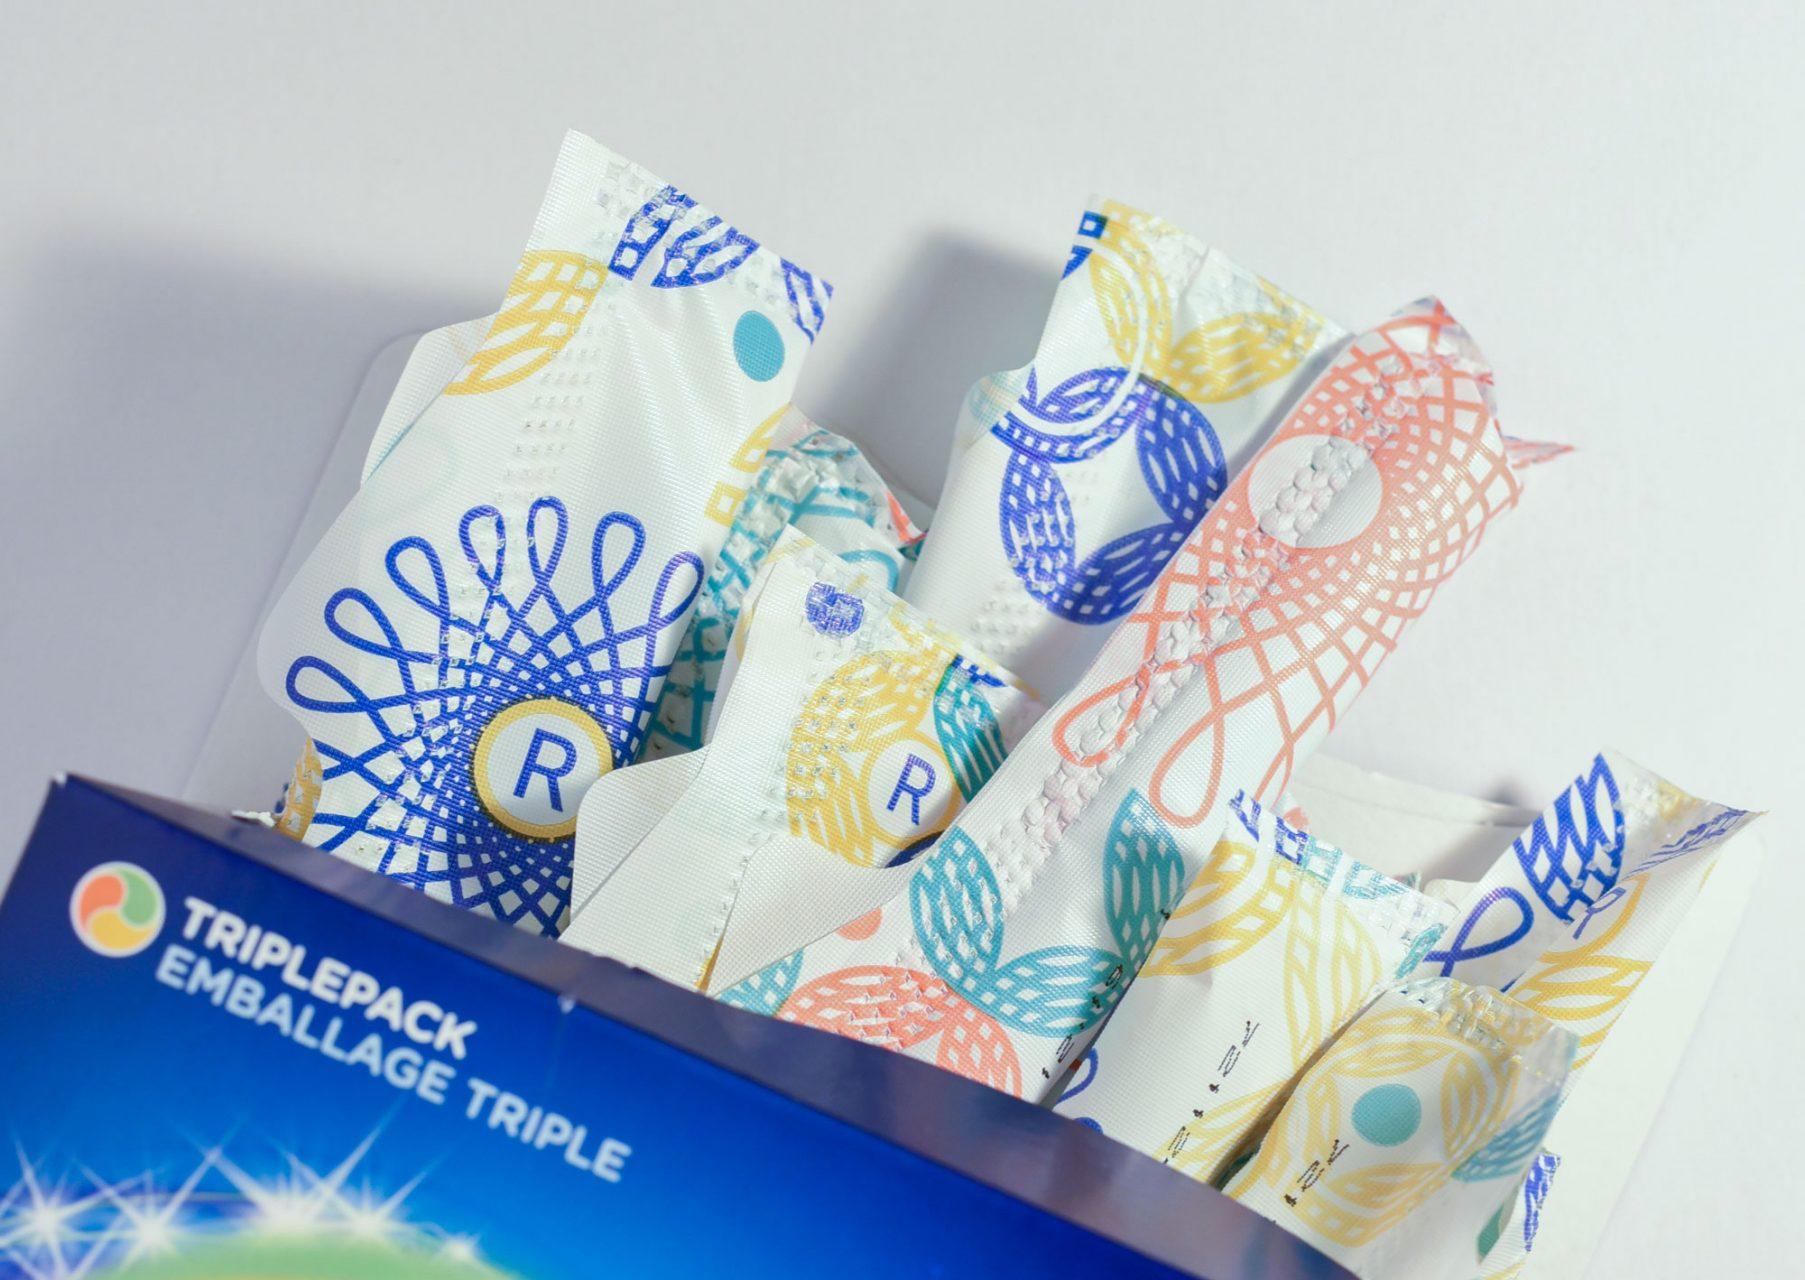 A box of tampons from the company Tampax with an assortment of sizes. A box like this costs about 7 dollars.